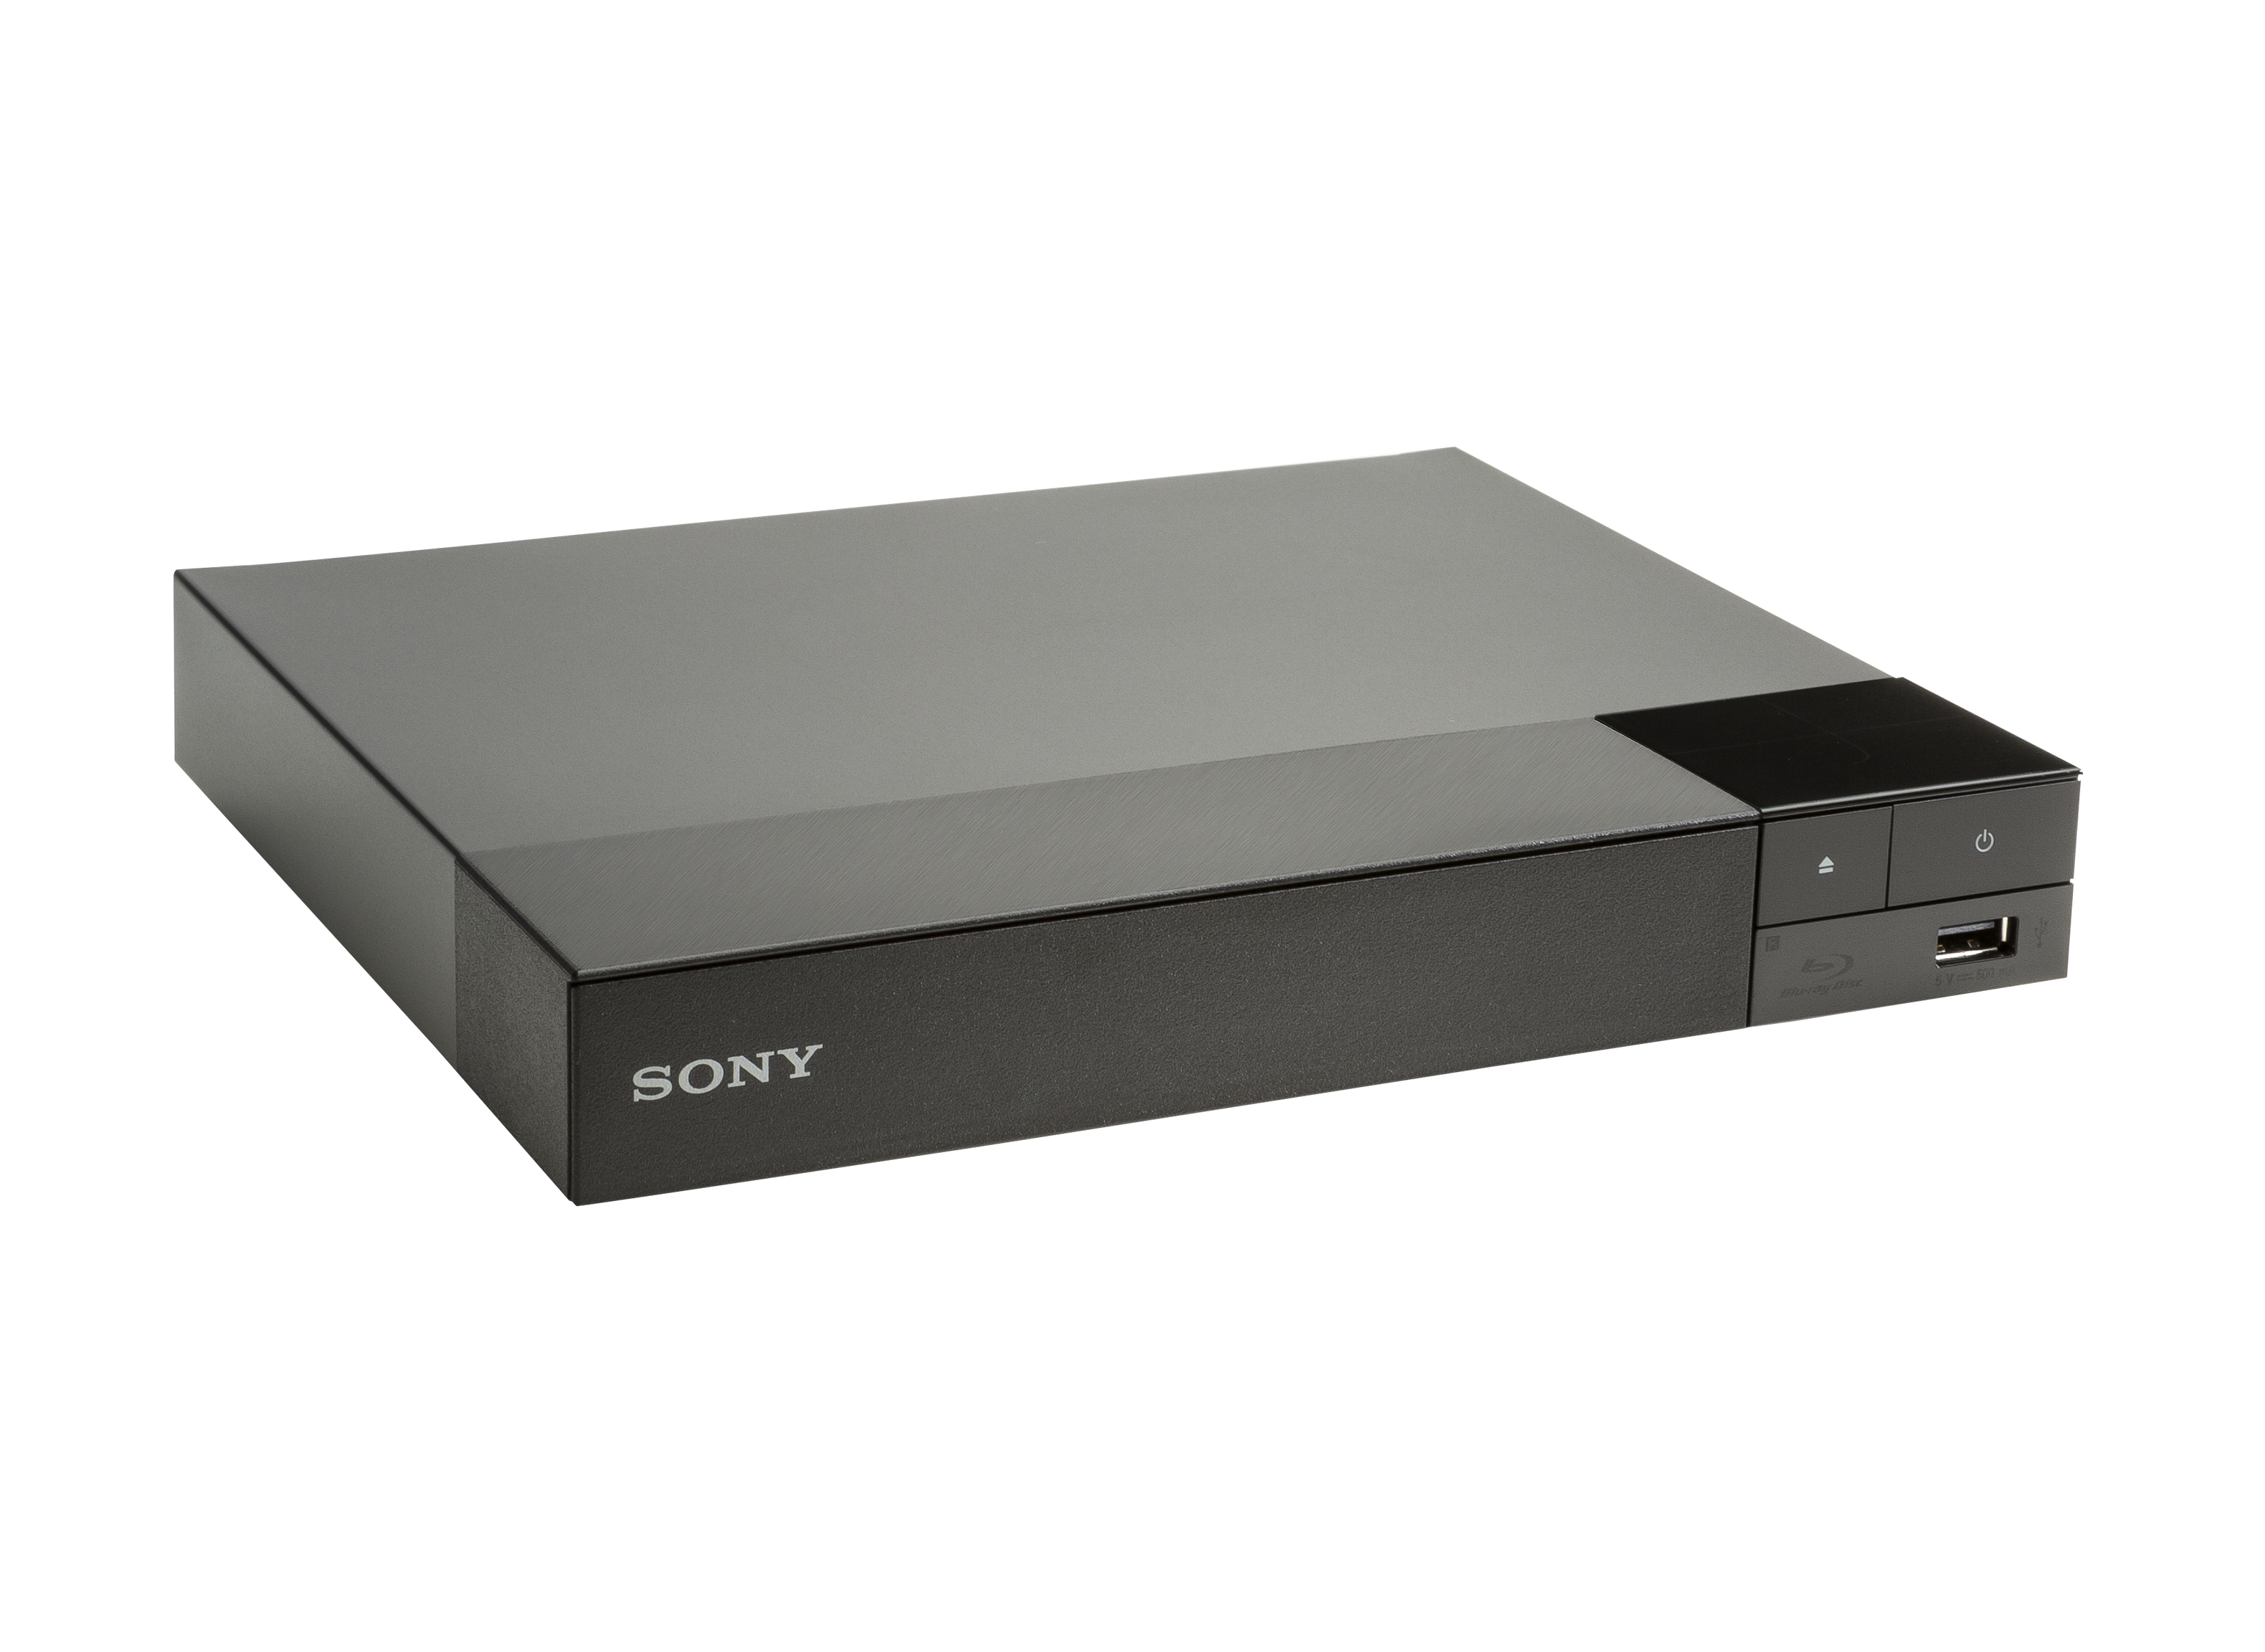 Sony BDP-S6700 Blu-Ray Player Review - Consumer Reports